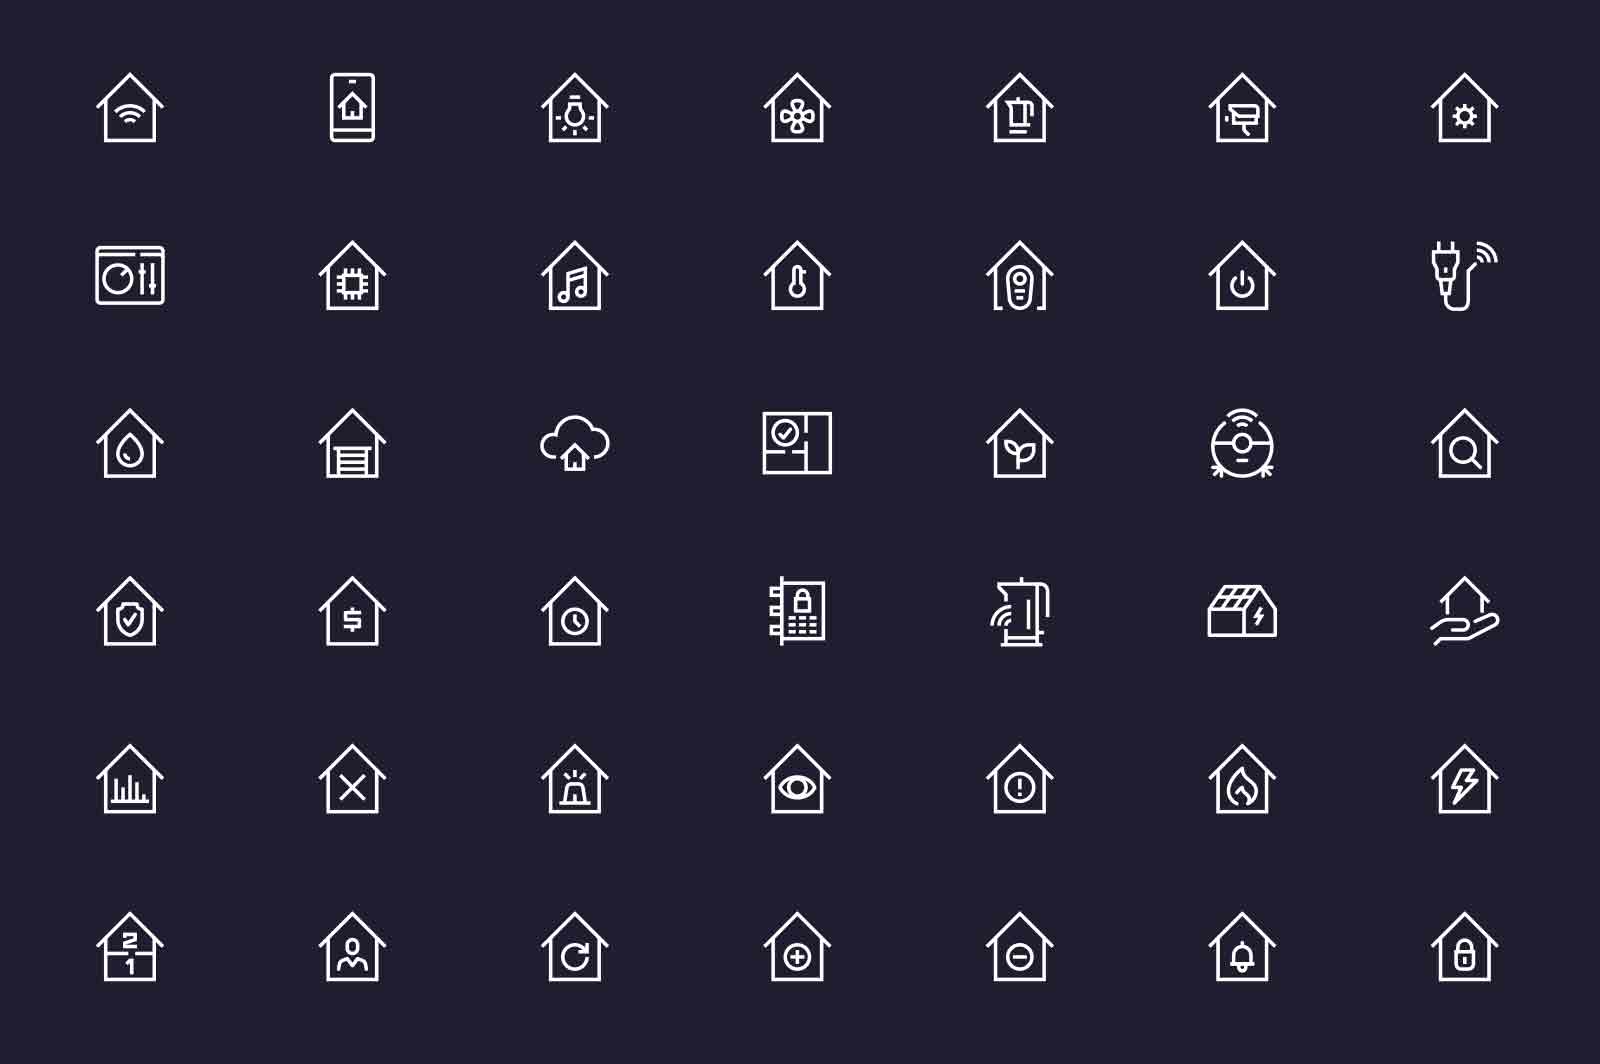 Smart house icons set vector illustration. Organize home through device line icon. Dark background